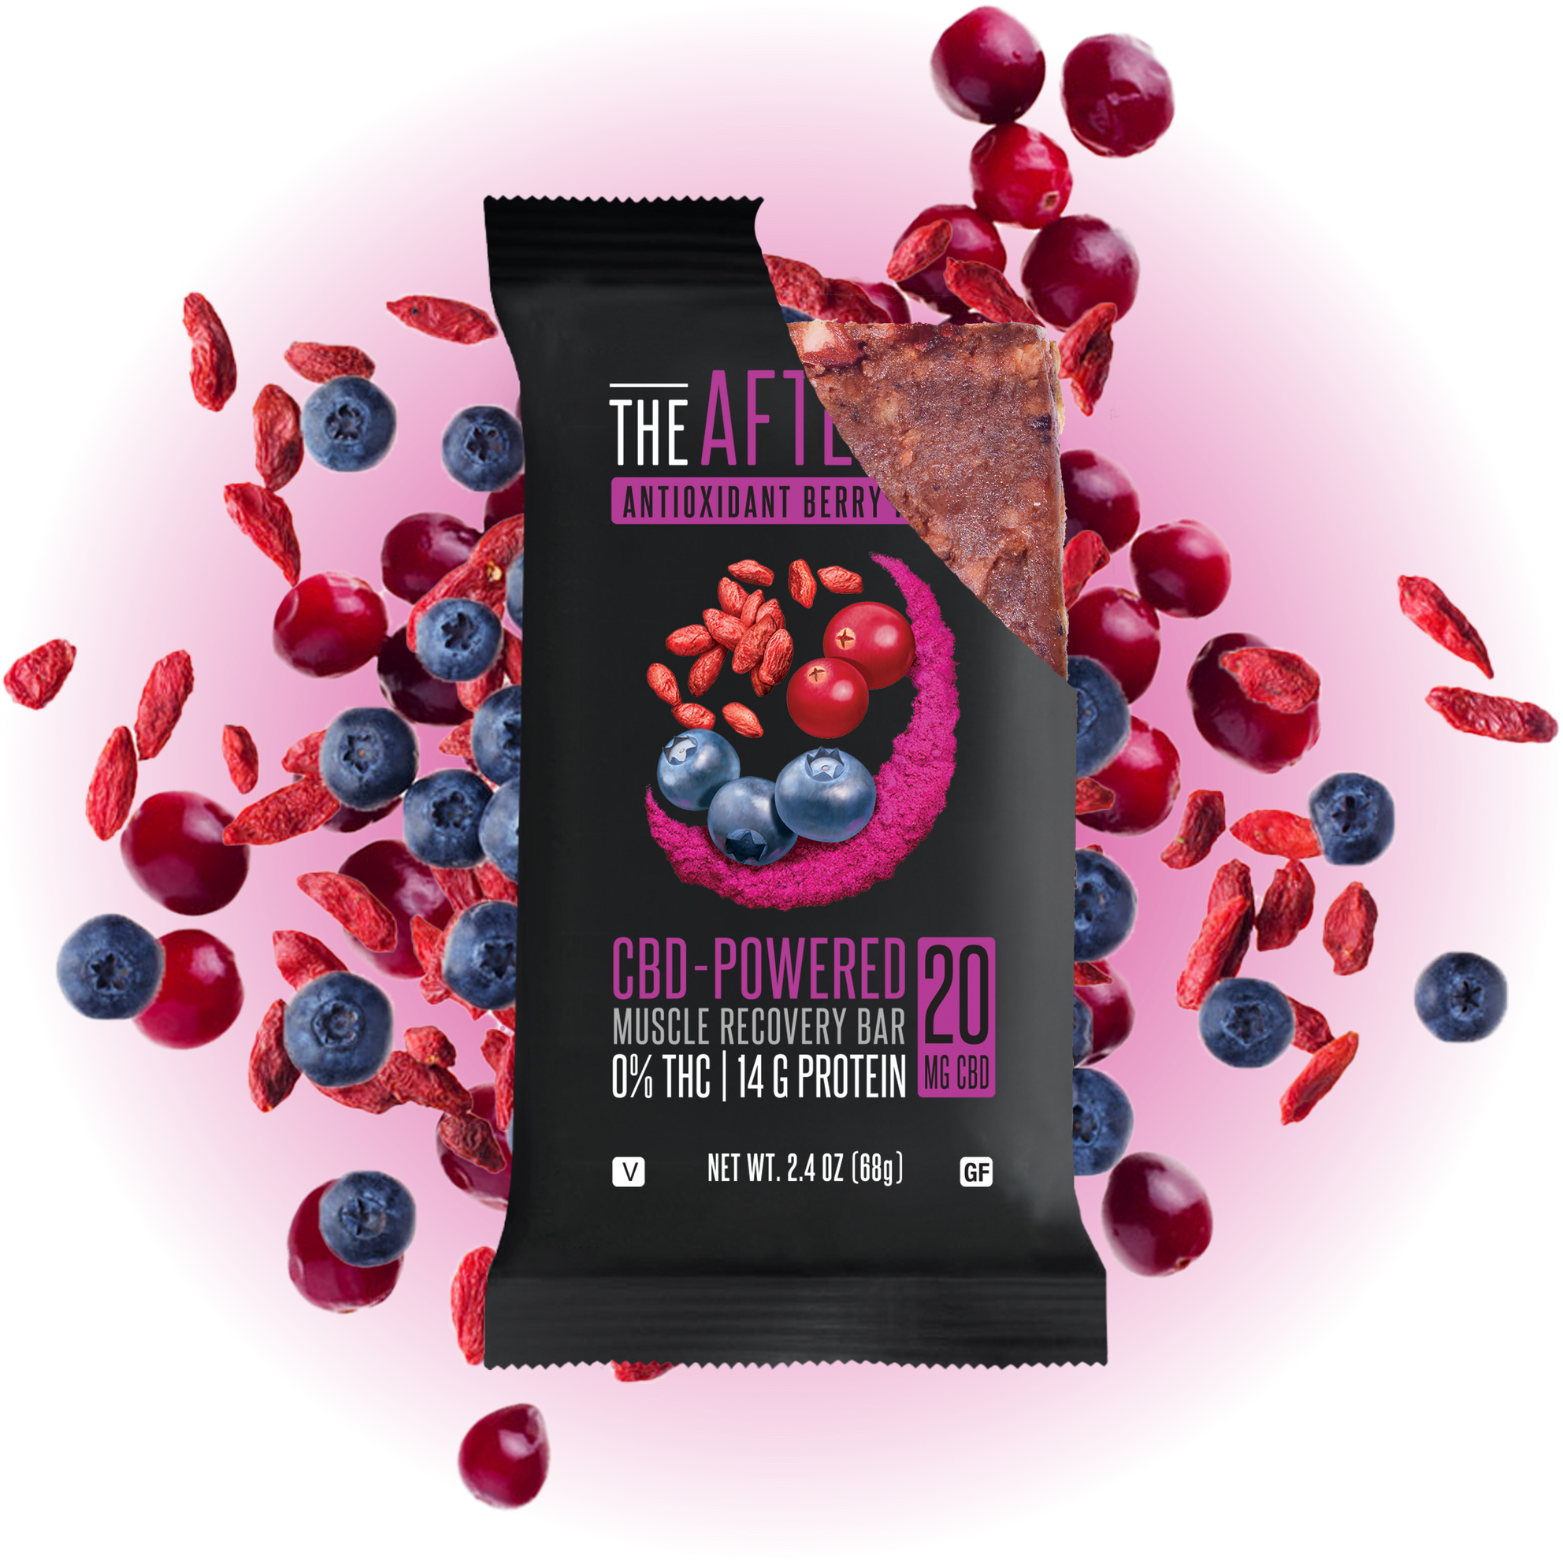 ANTIOXIDANT BERRY FUSION The After Bar